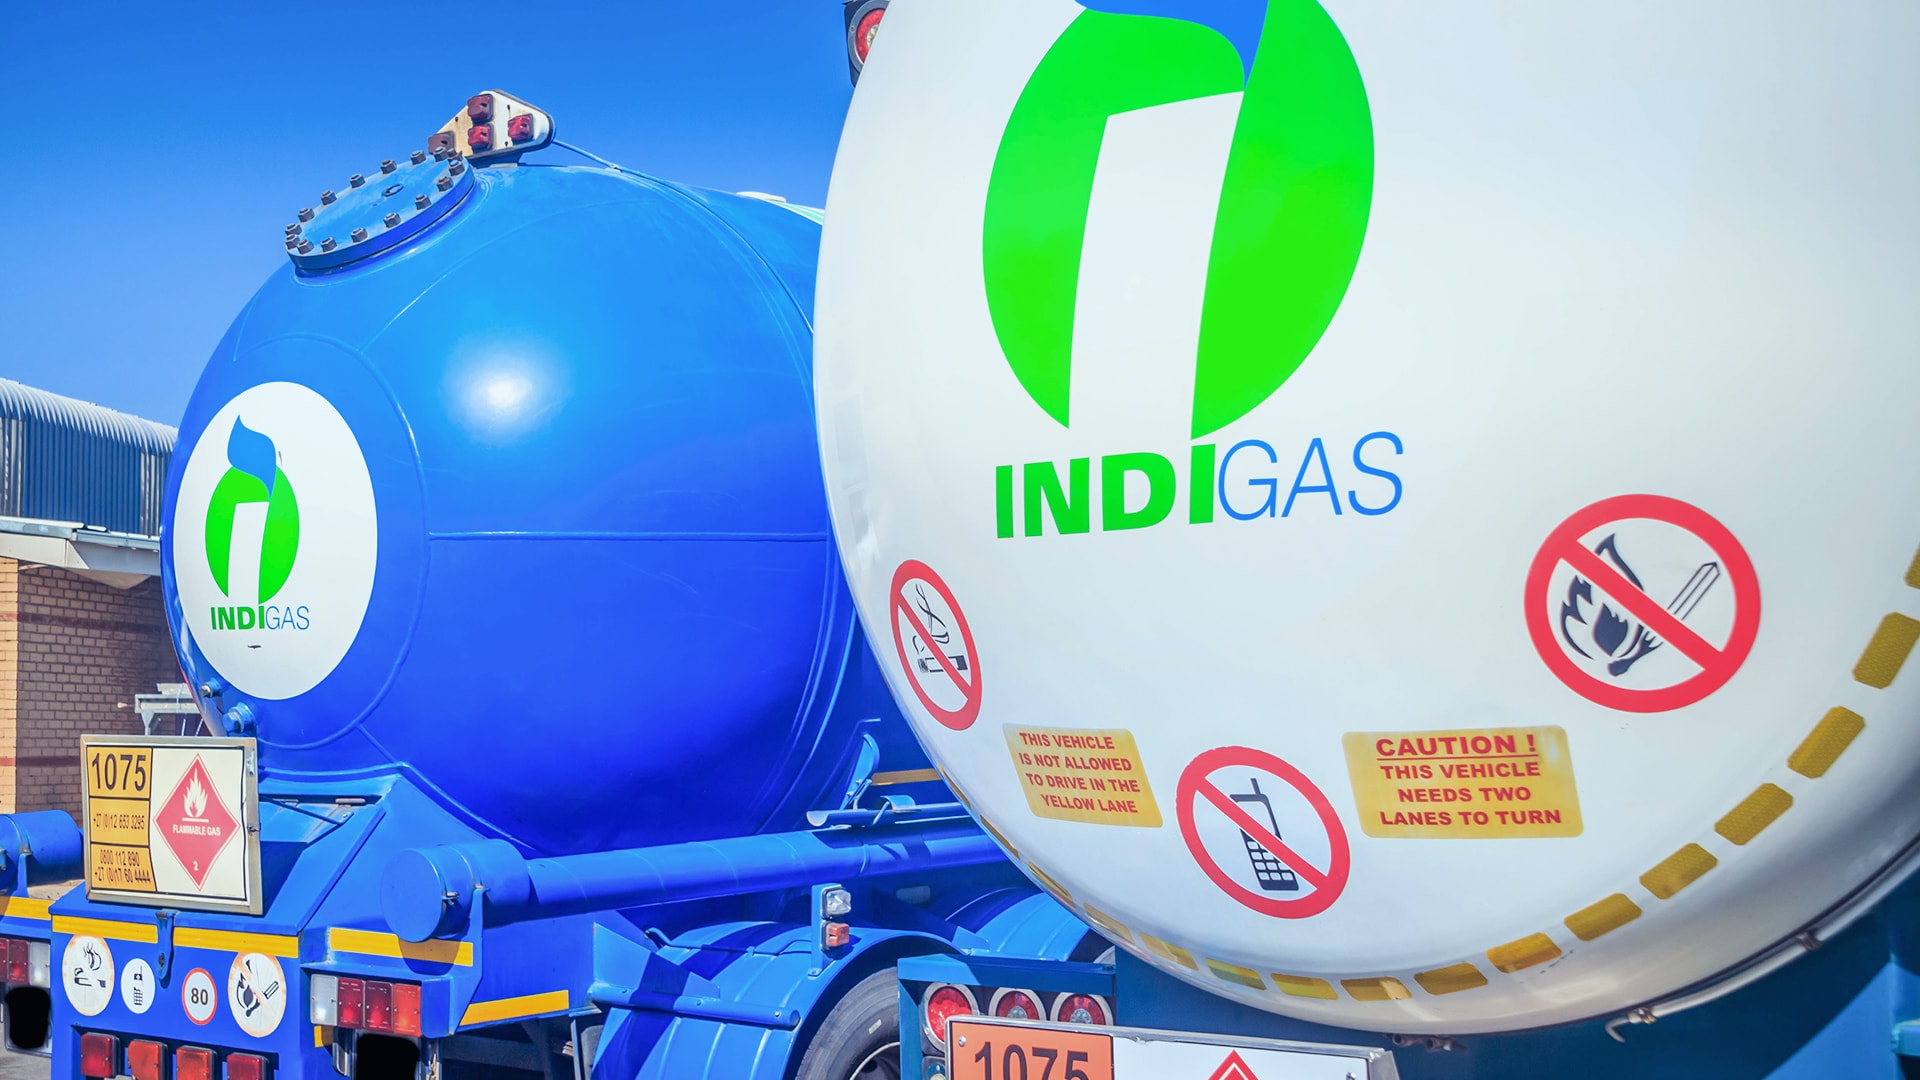 indigas web image tankers 5